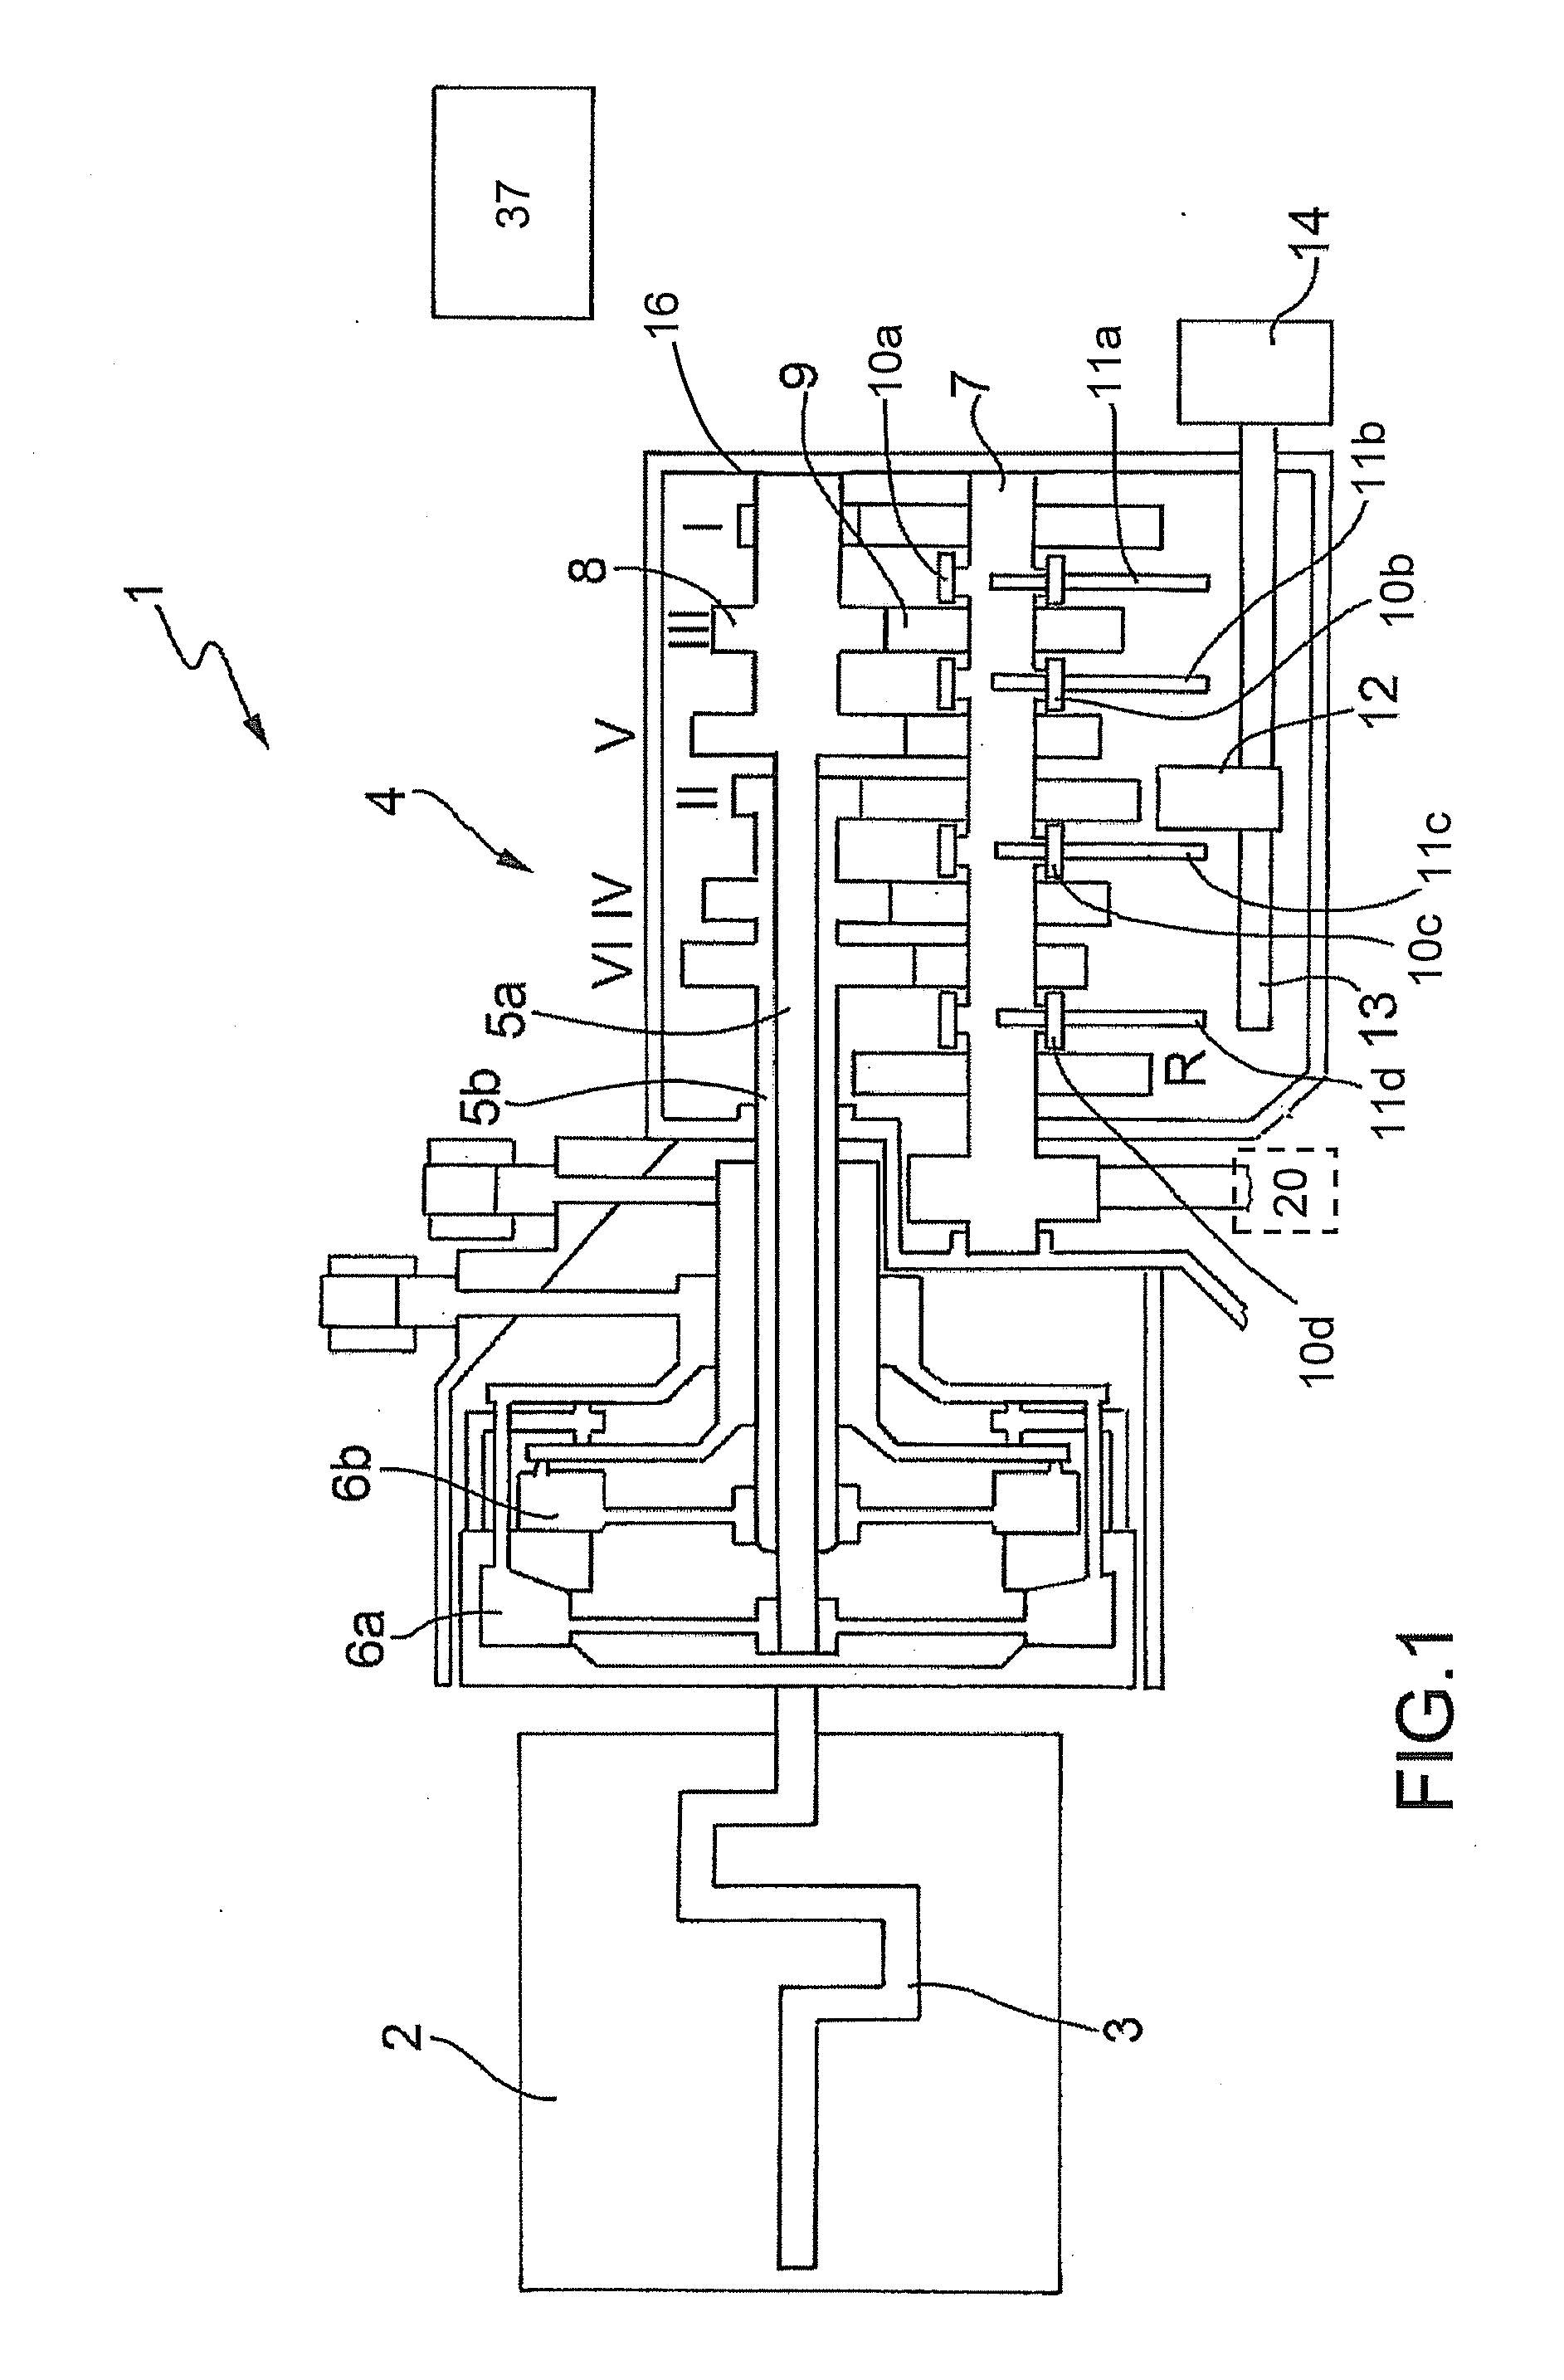 Automatic manual transmission provided with parking lock device